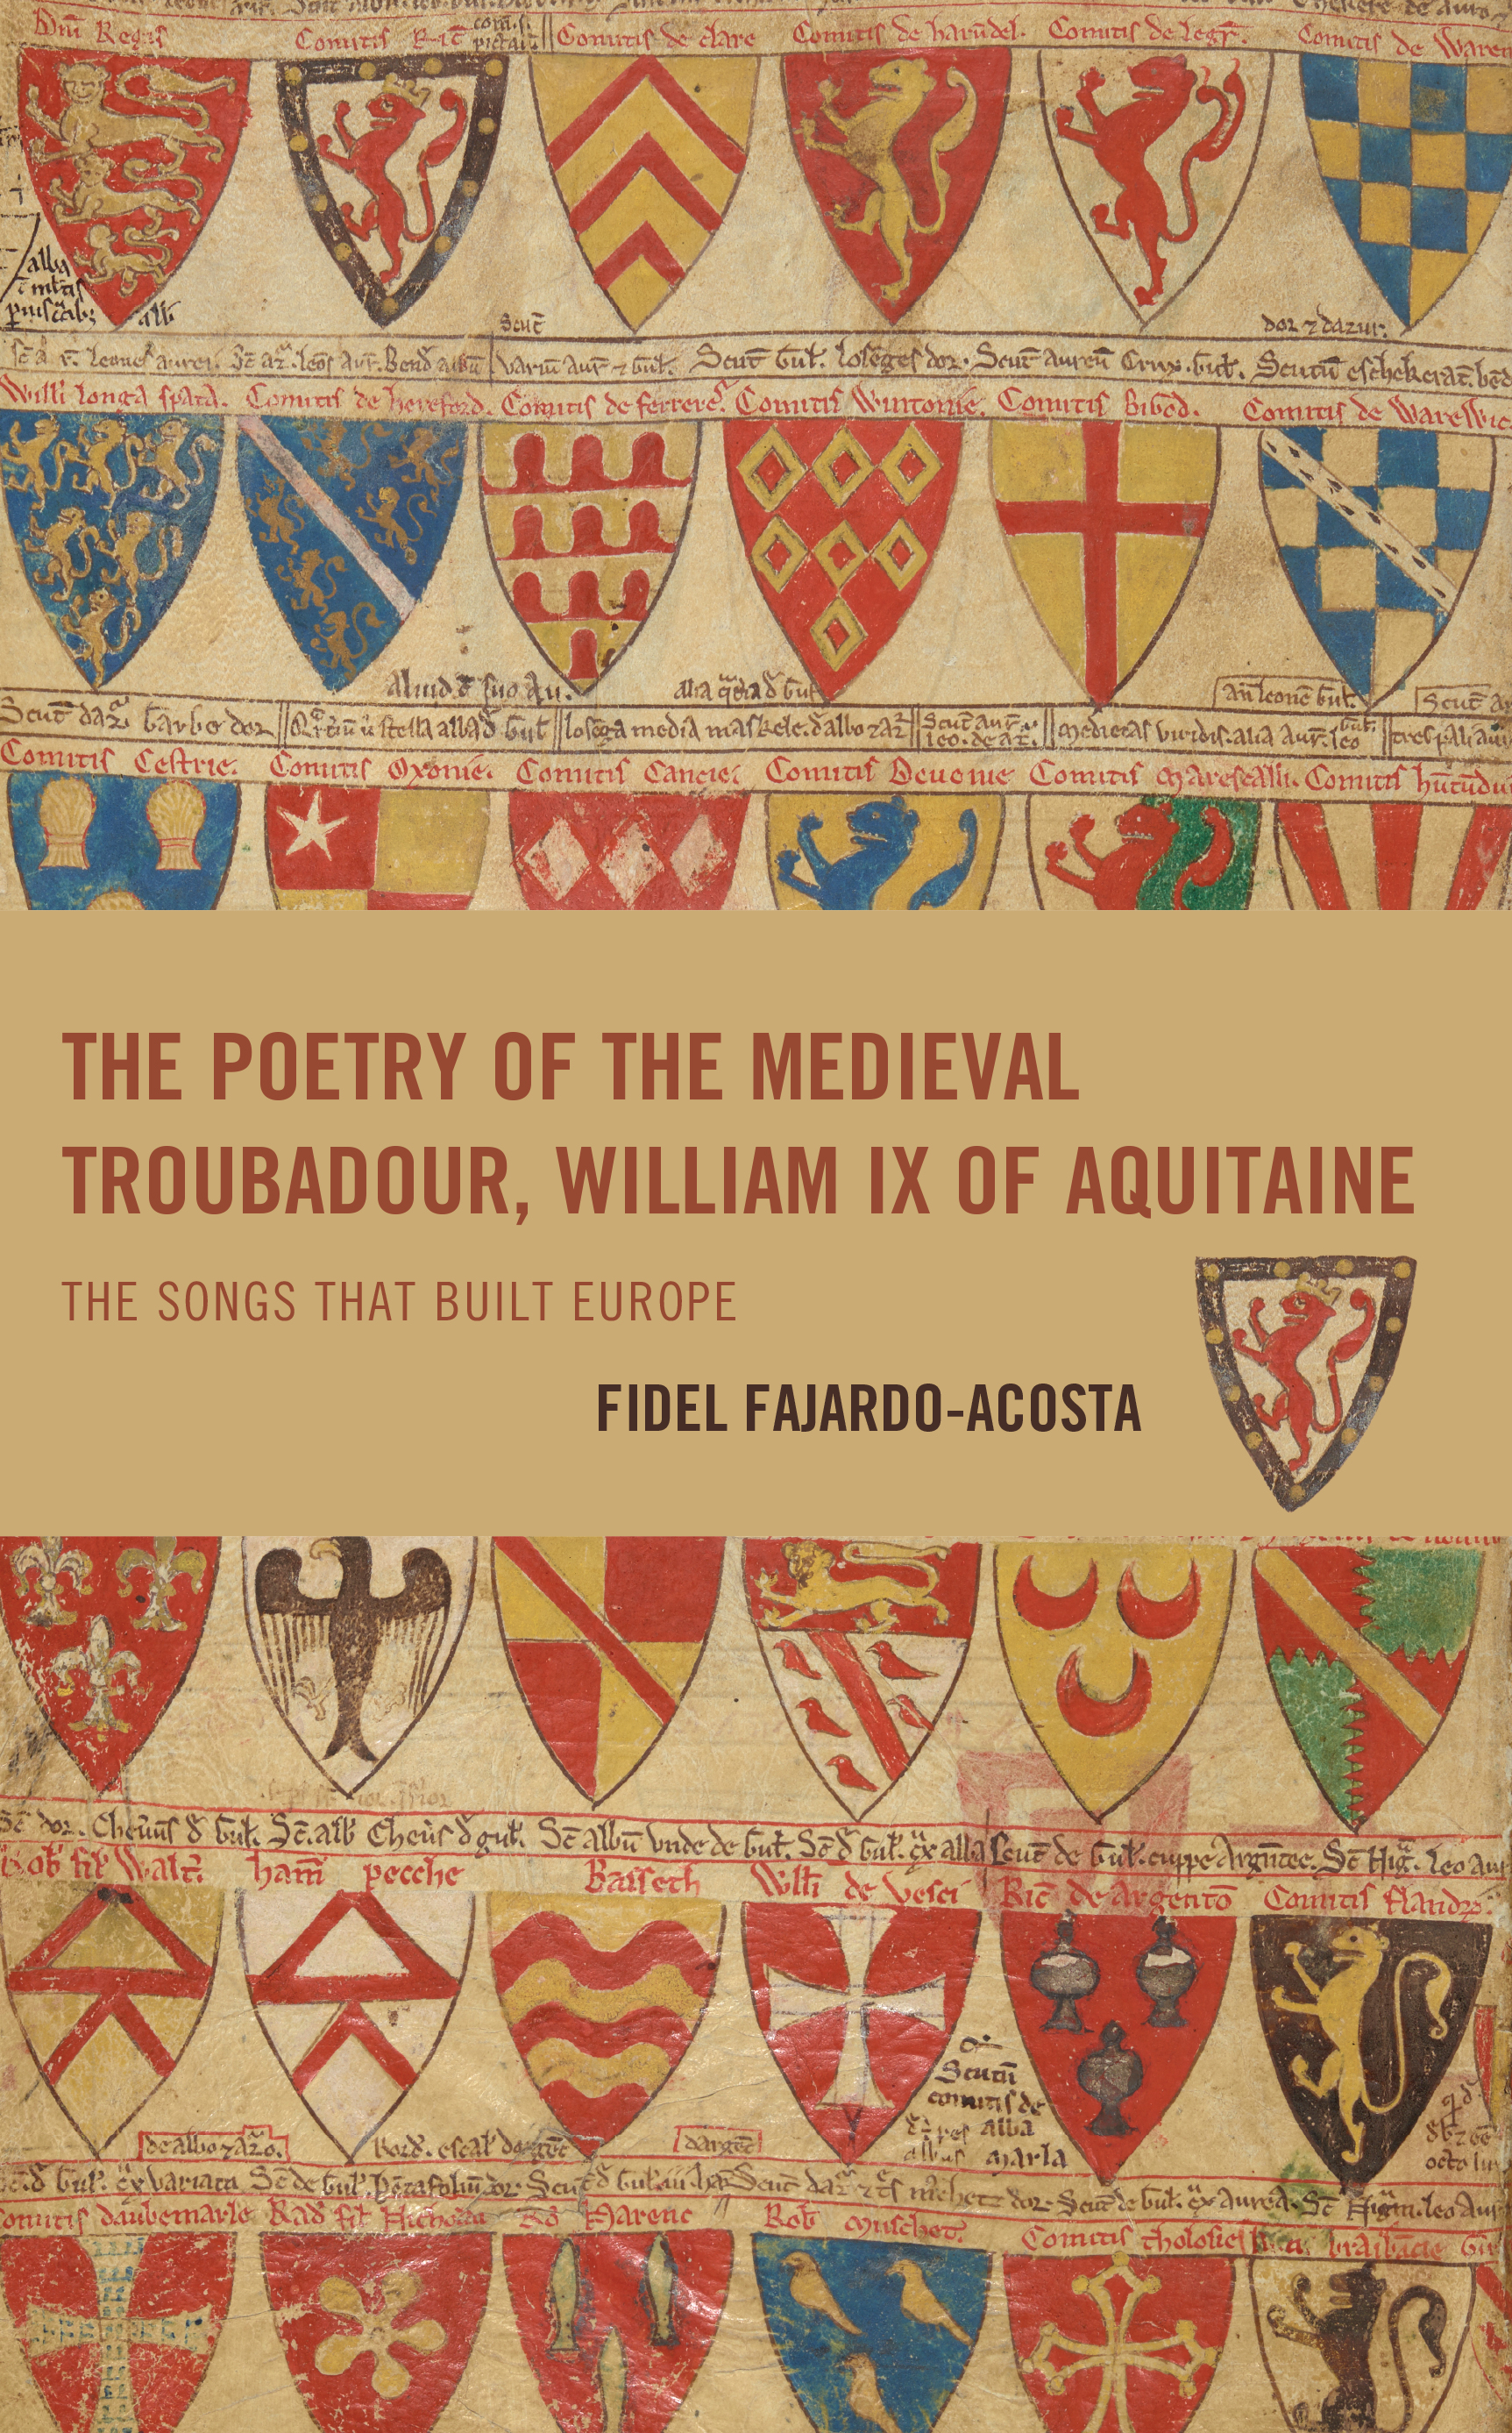 The Poetry of the Medieval Troubadour, William IX of Aquitaine: The Songs that Built Europe